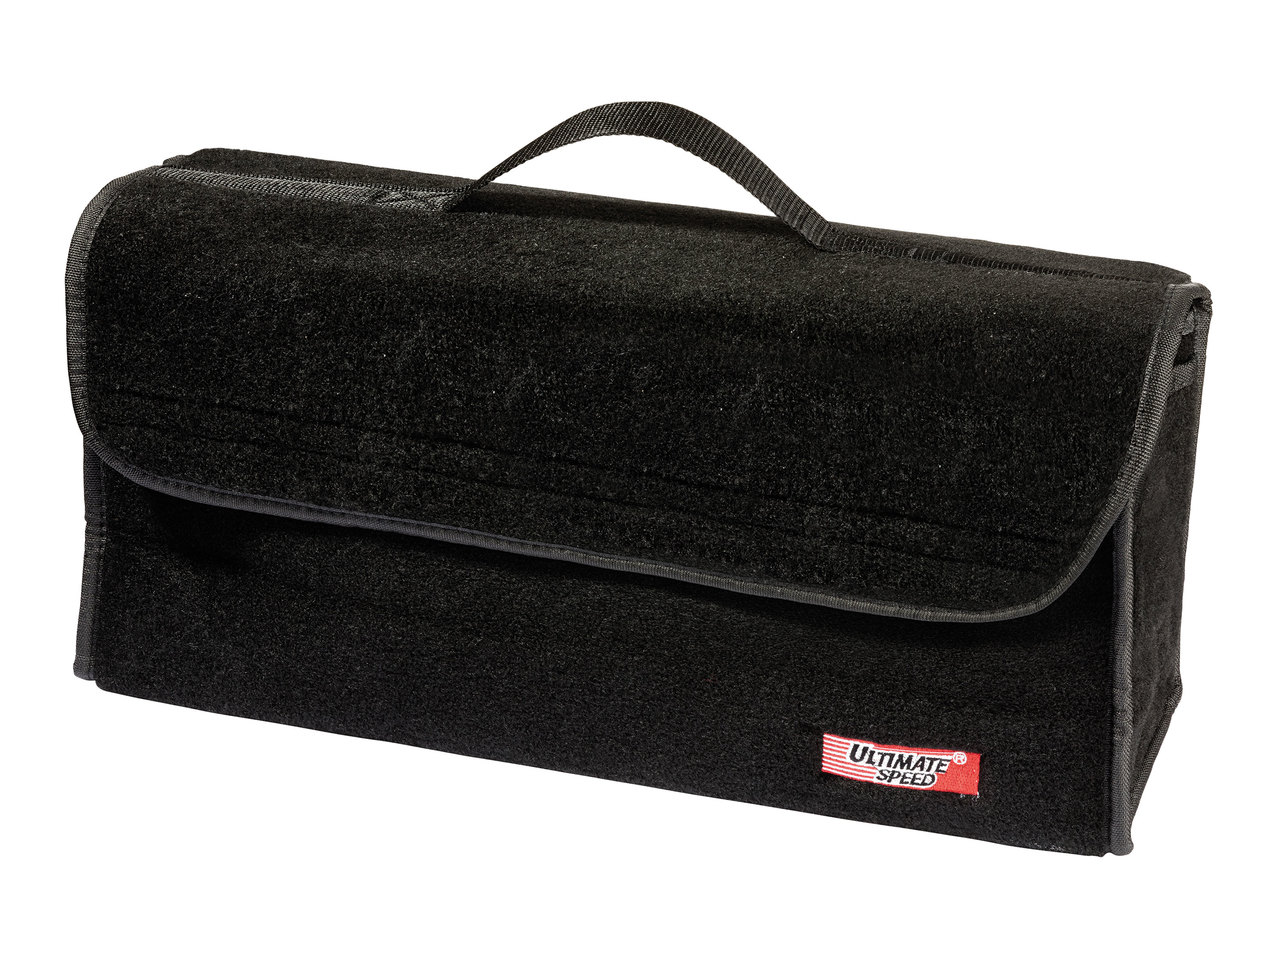 Ultimate Speed Car Boot Bag or Non-Slip Protective Mat1